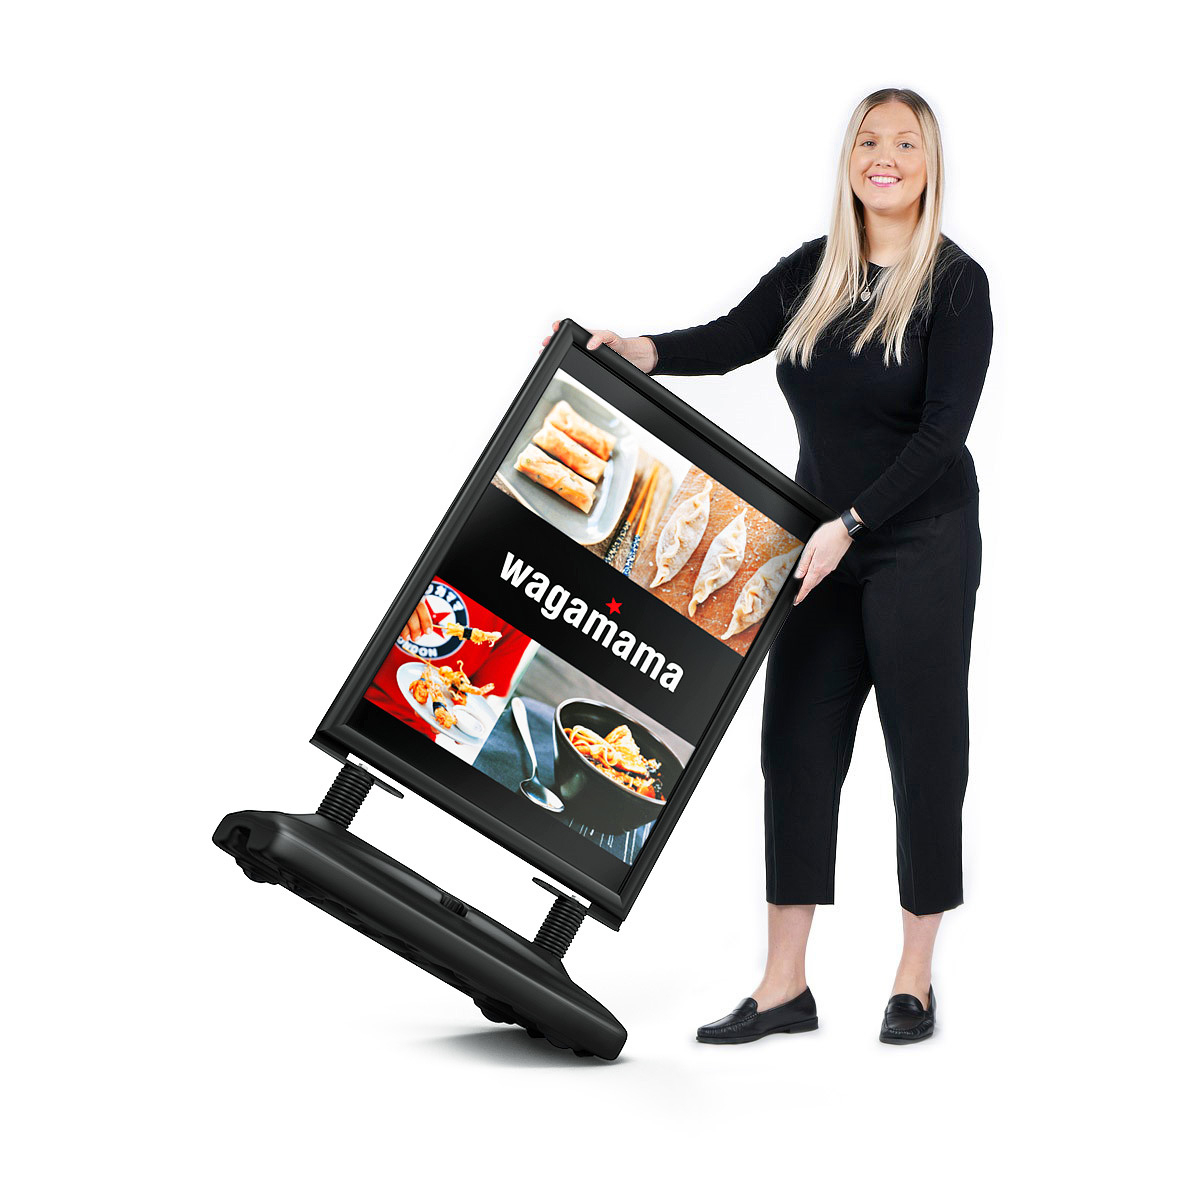 WINDSTORM® PRO Black Outdoor Pavement Sign A1 With XL Displays Model